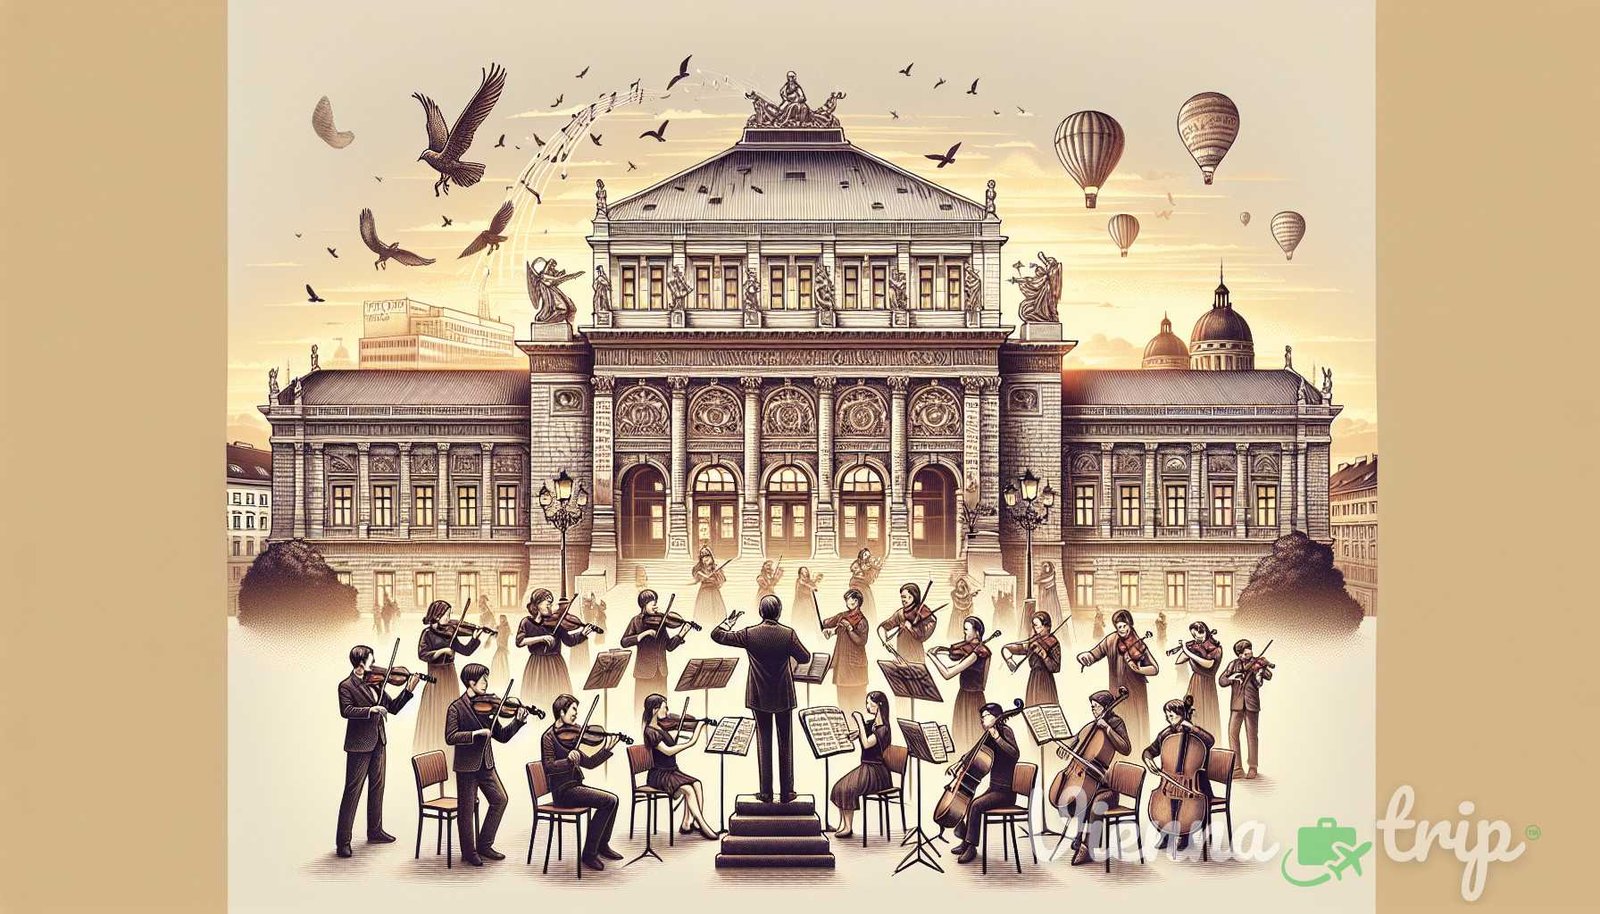 Illustration for section: 1. Music conservatories: Vienna boasts several prestigious music conservatories, such as the Univers - vienna melodies